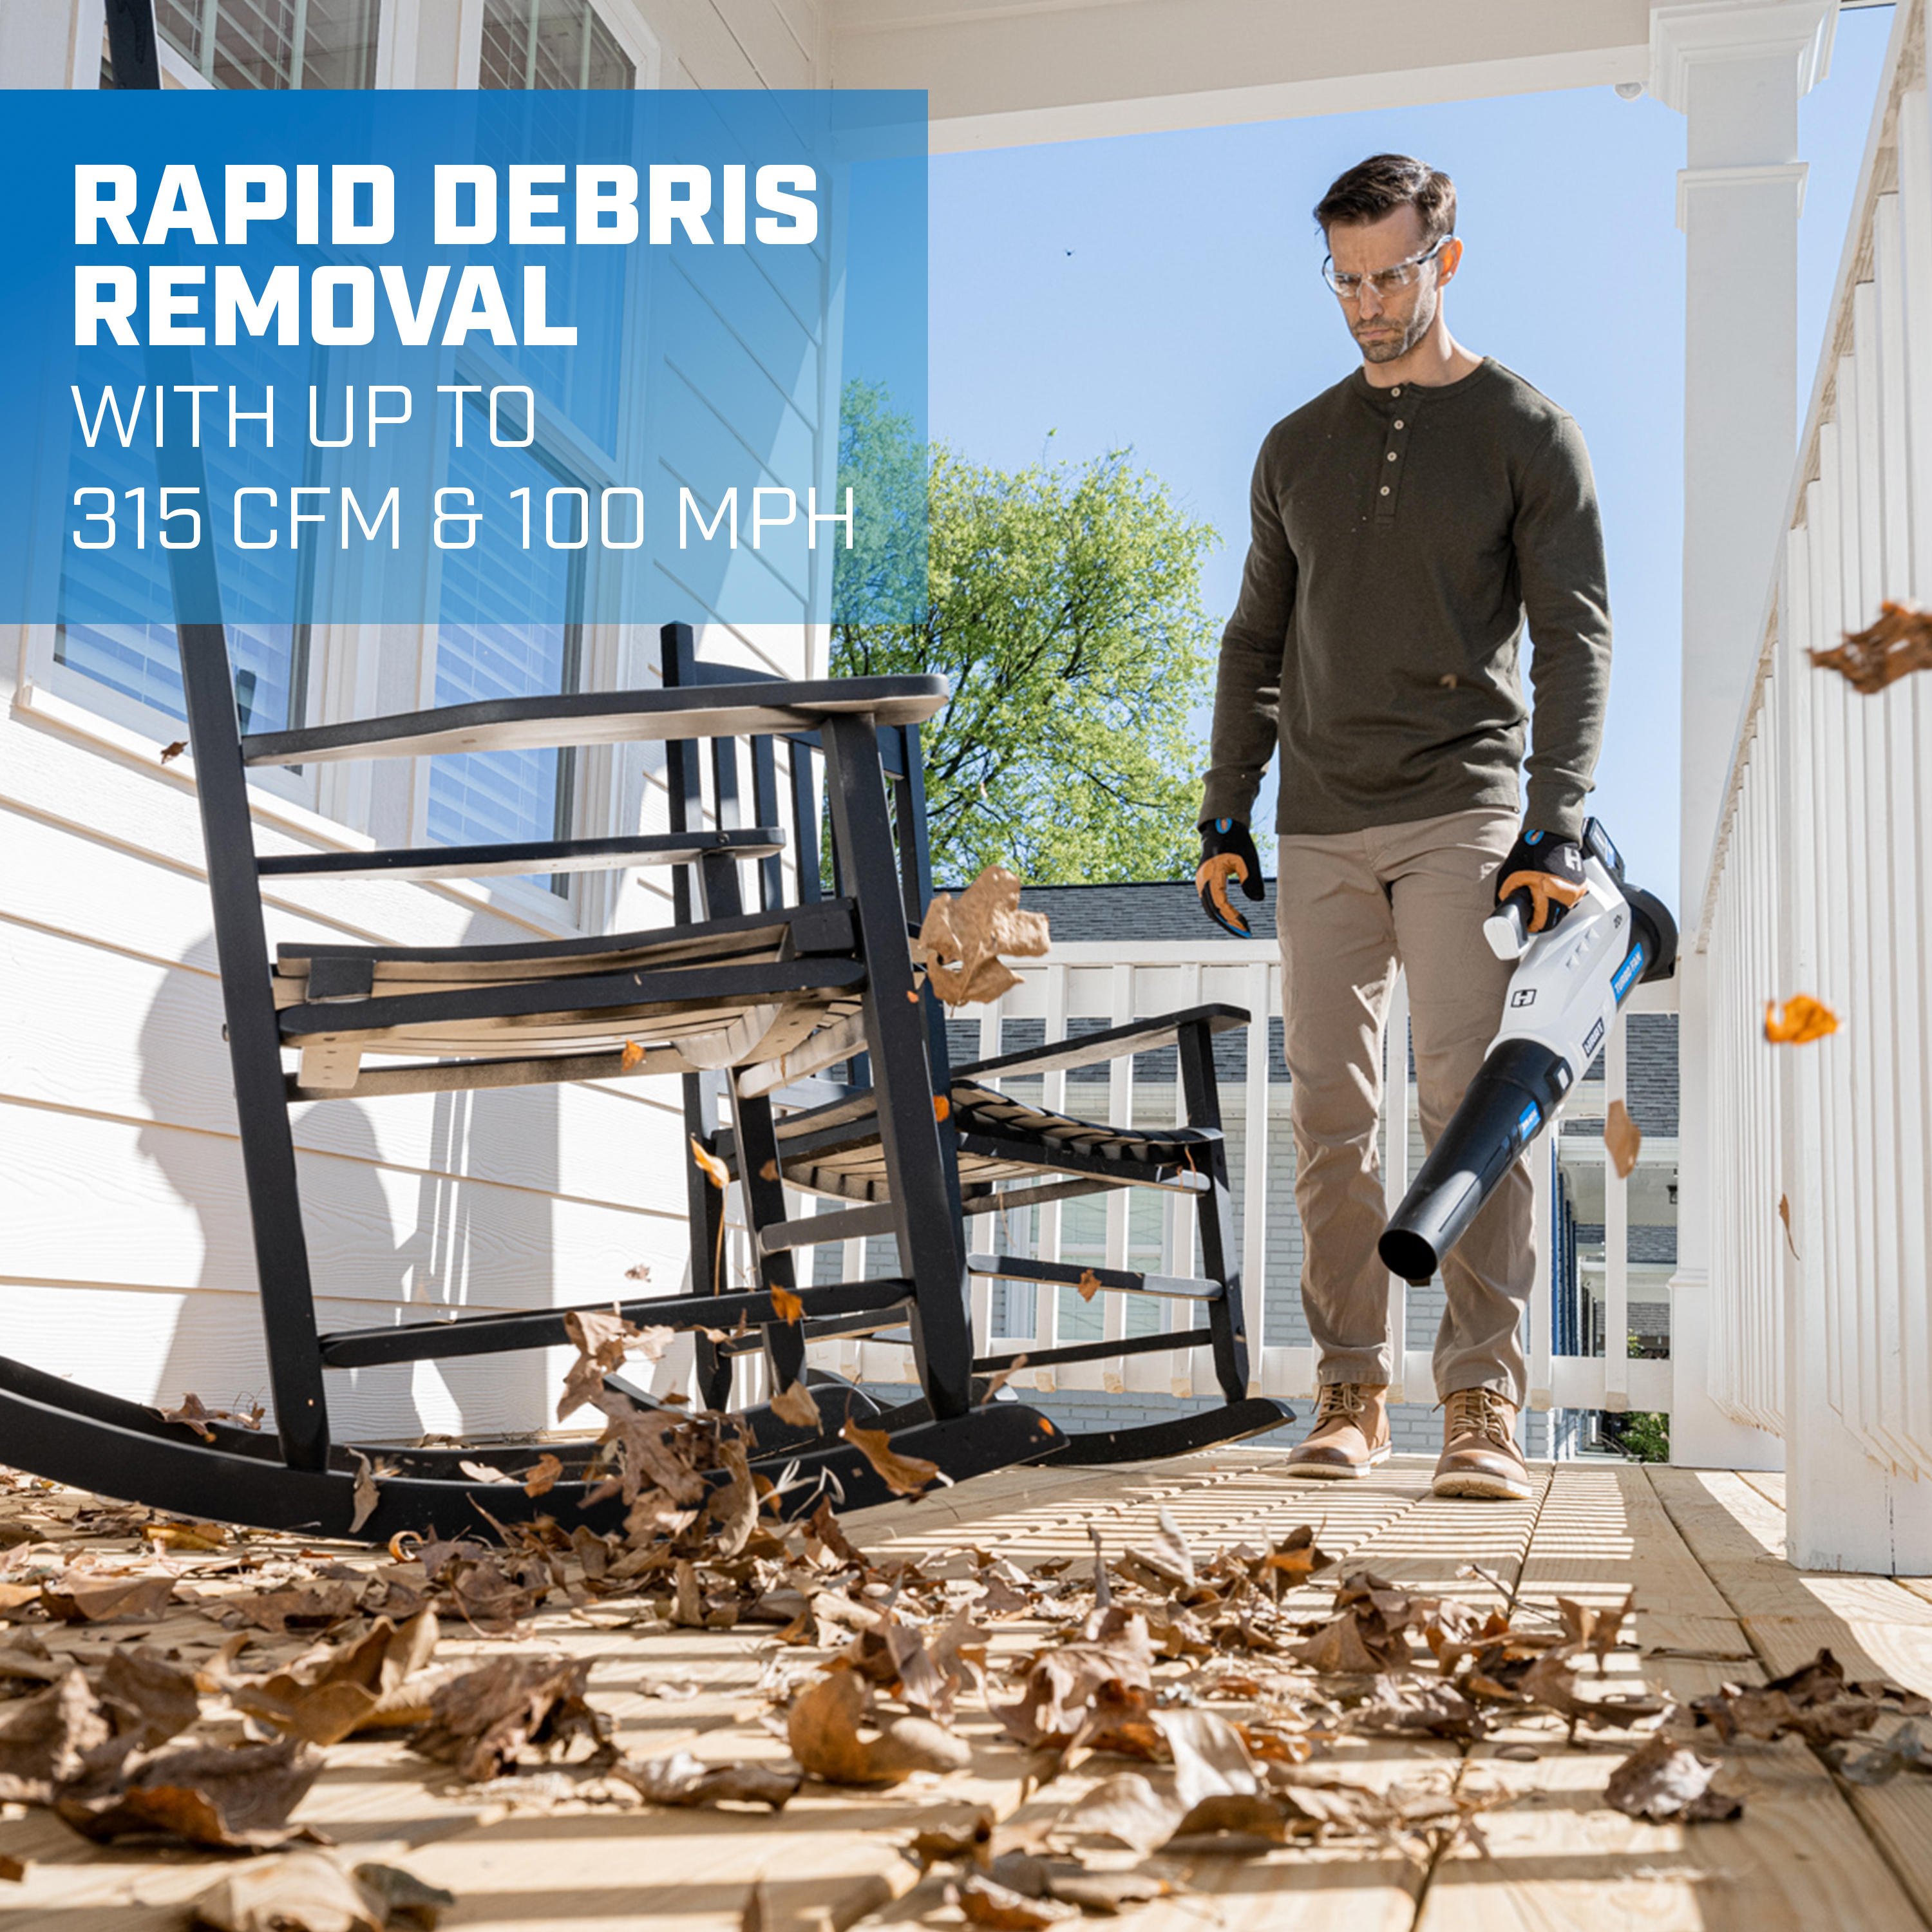 Rapid Debris Removal with Up to 315 CFM and 100 MPH